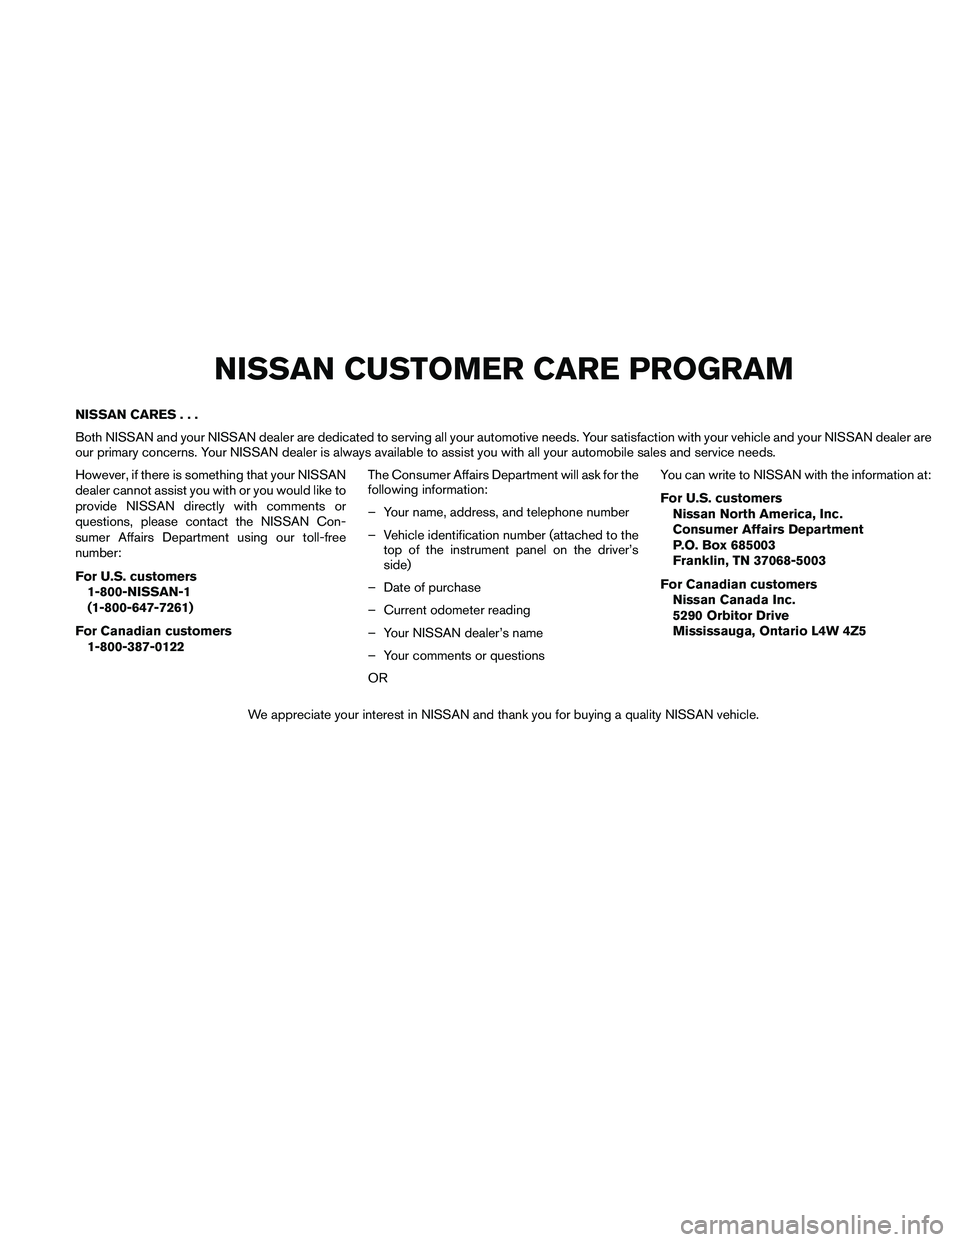 NISSAN FRONTIER 2010  Owner´s Manual NISSAN CARES...
Both NISSAN and your NISSAN dealer are dedicated to serving all your automotive needs. Your satisfaction with your vehicle and your NISSAN dealer are
our primary concerns. Your NISSAN 